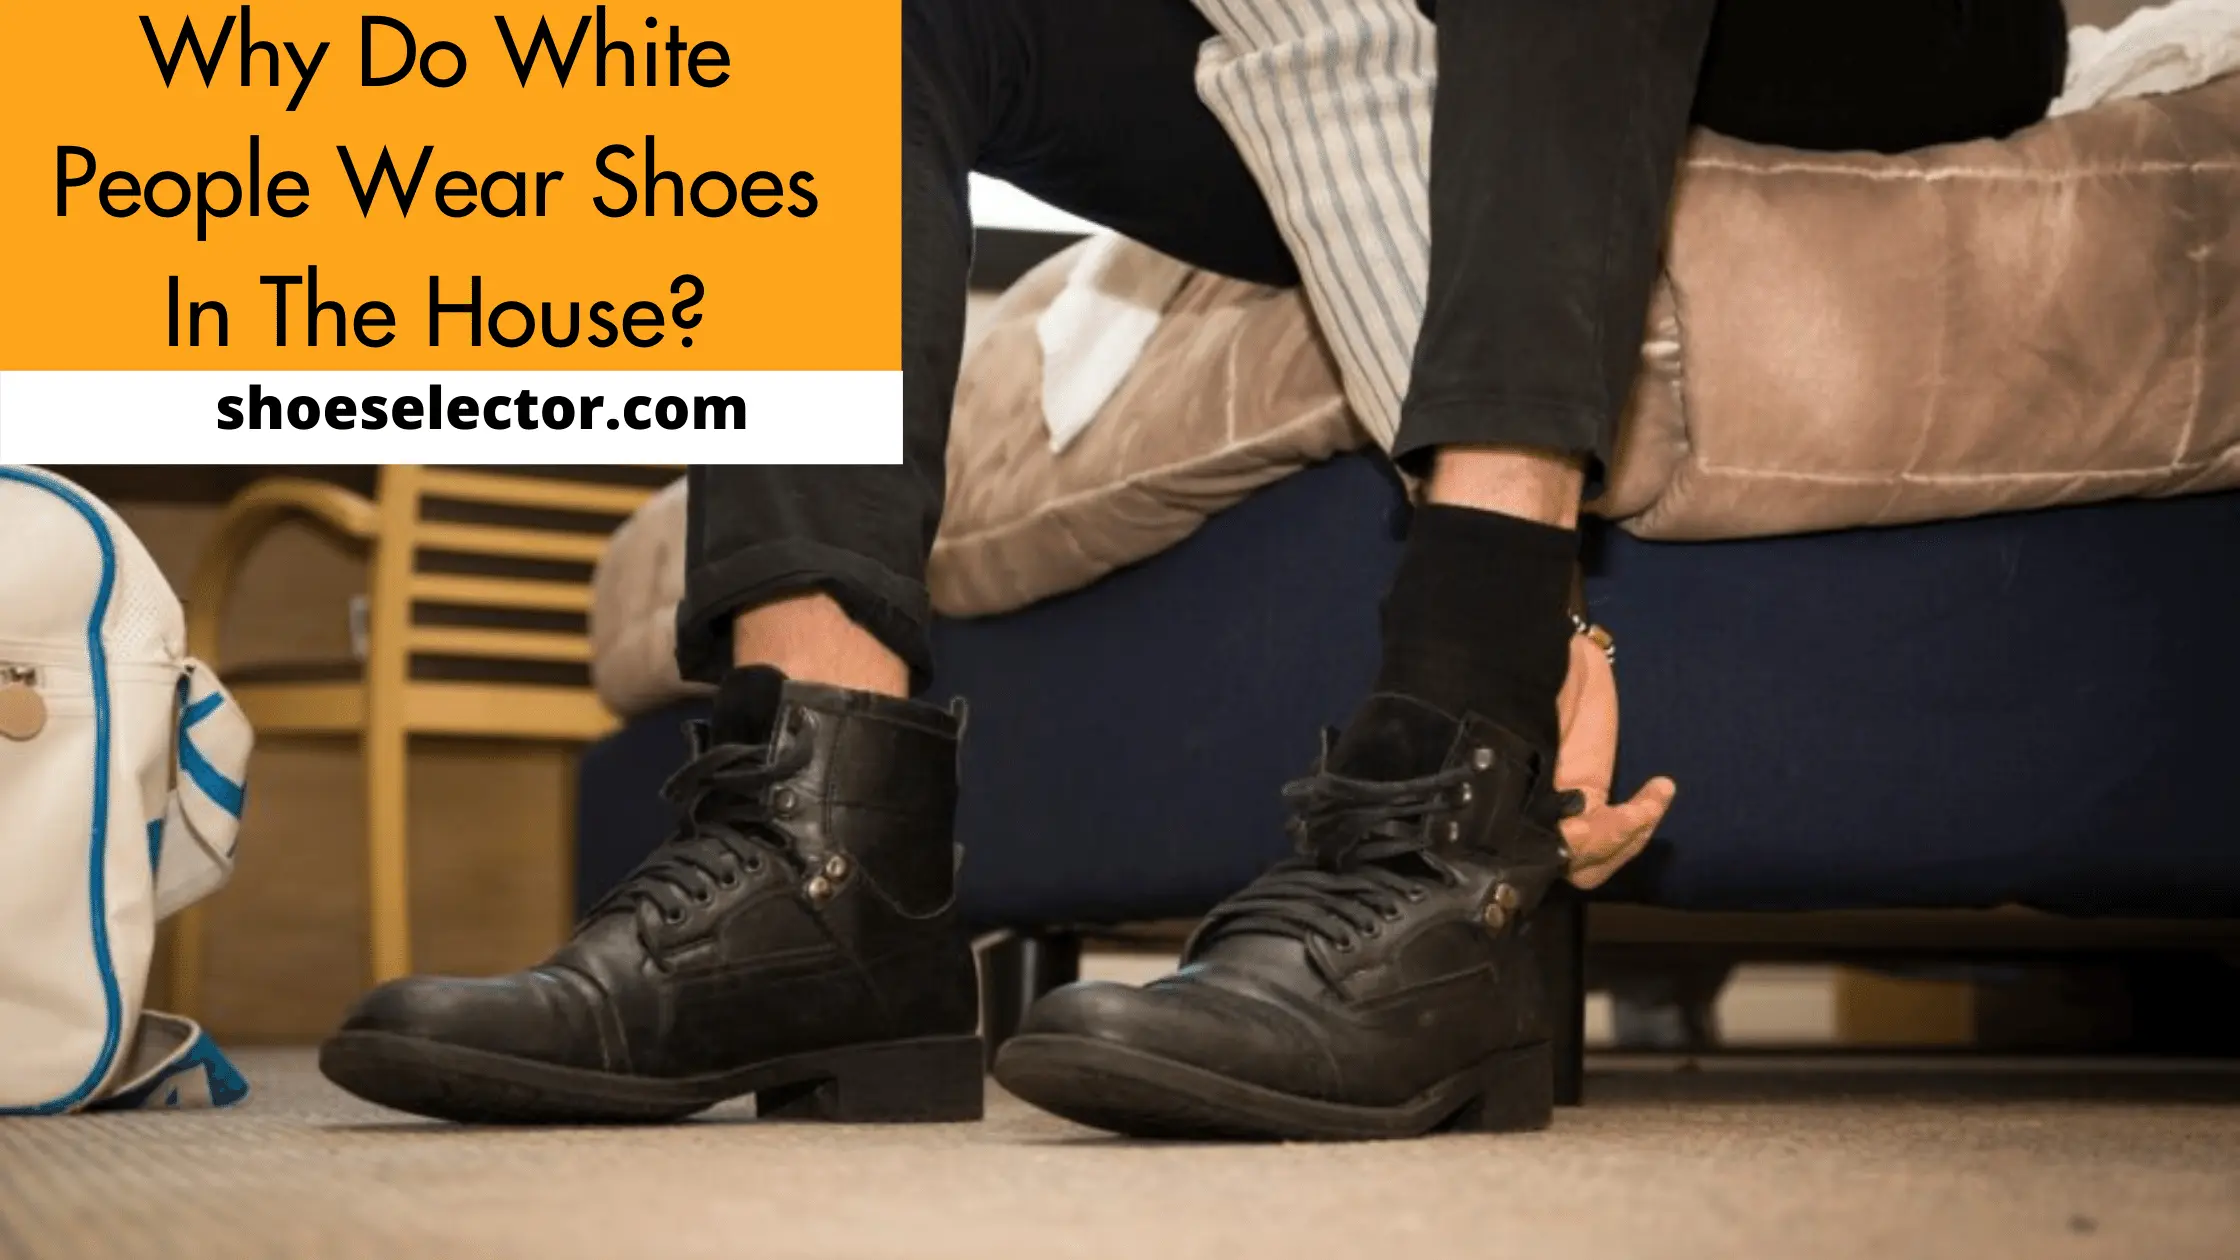 Why Do White People Wear Shoes In The House?